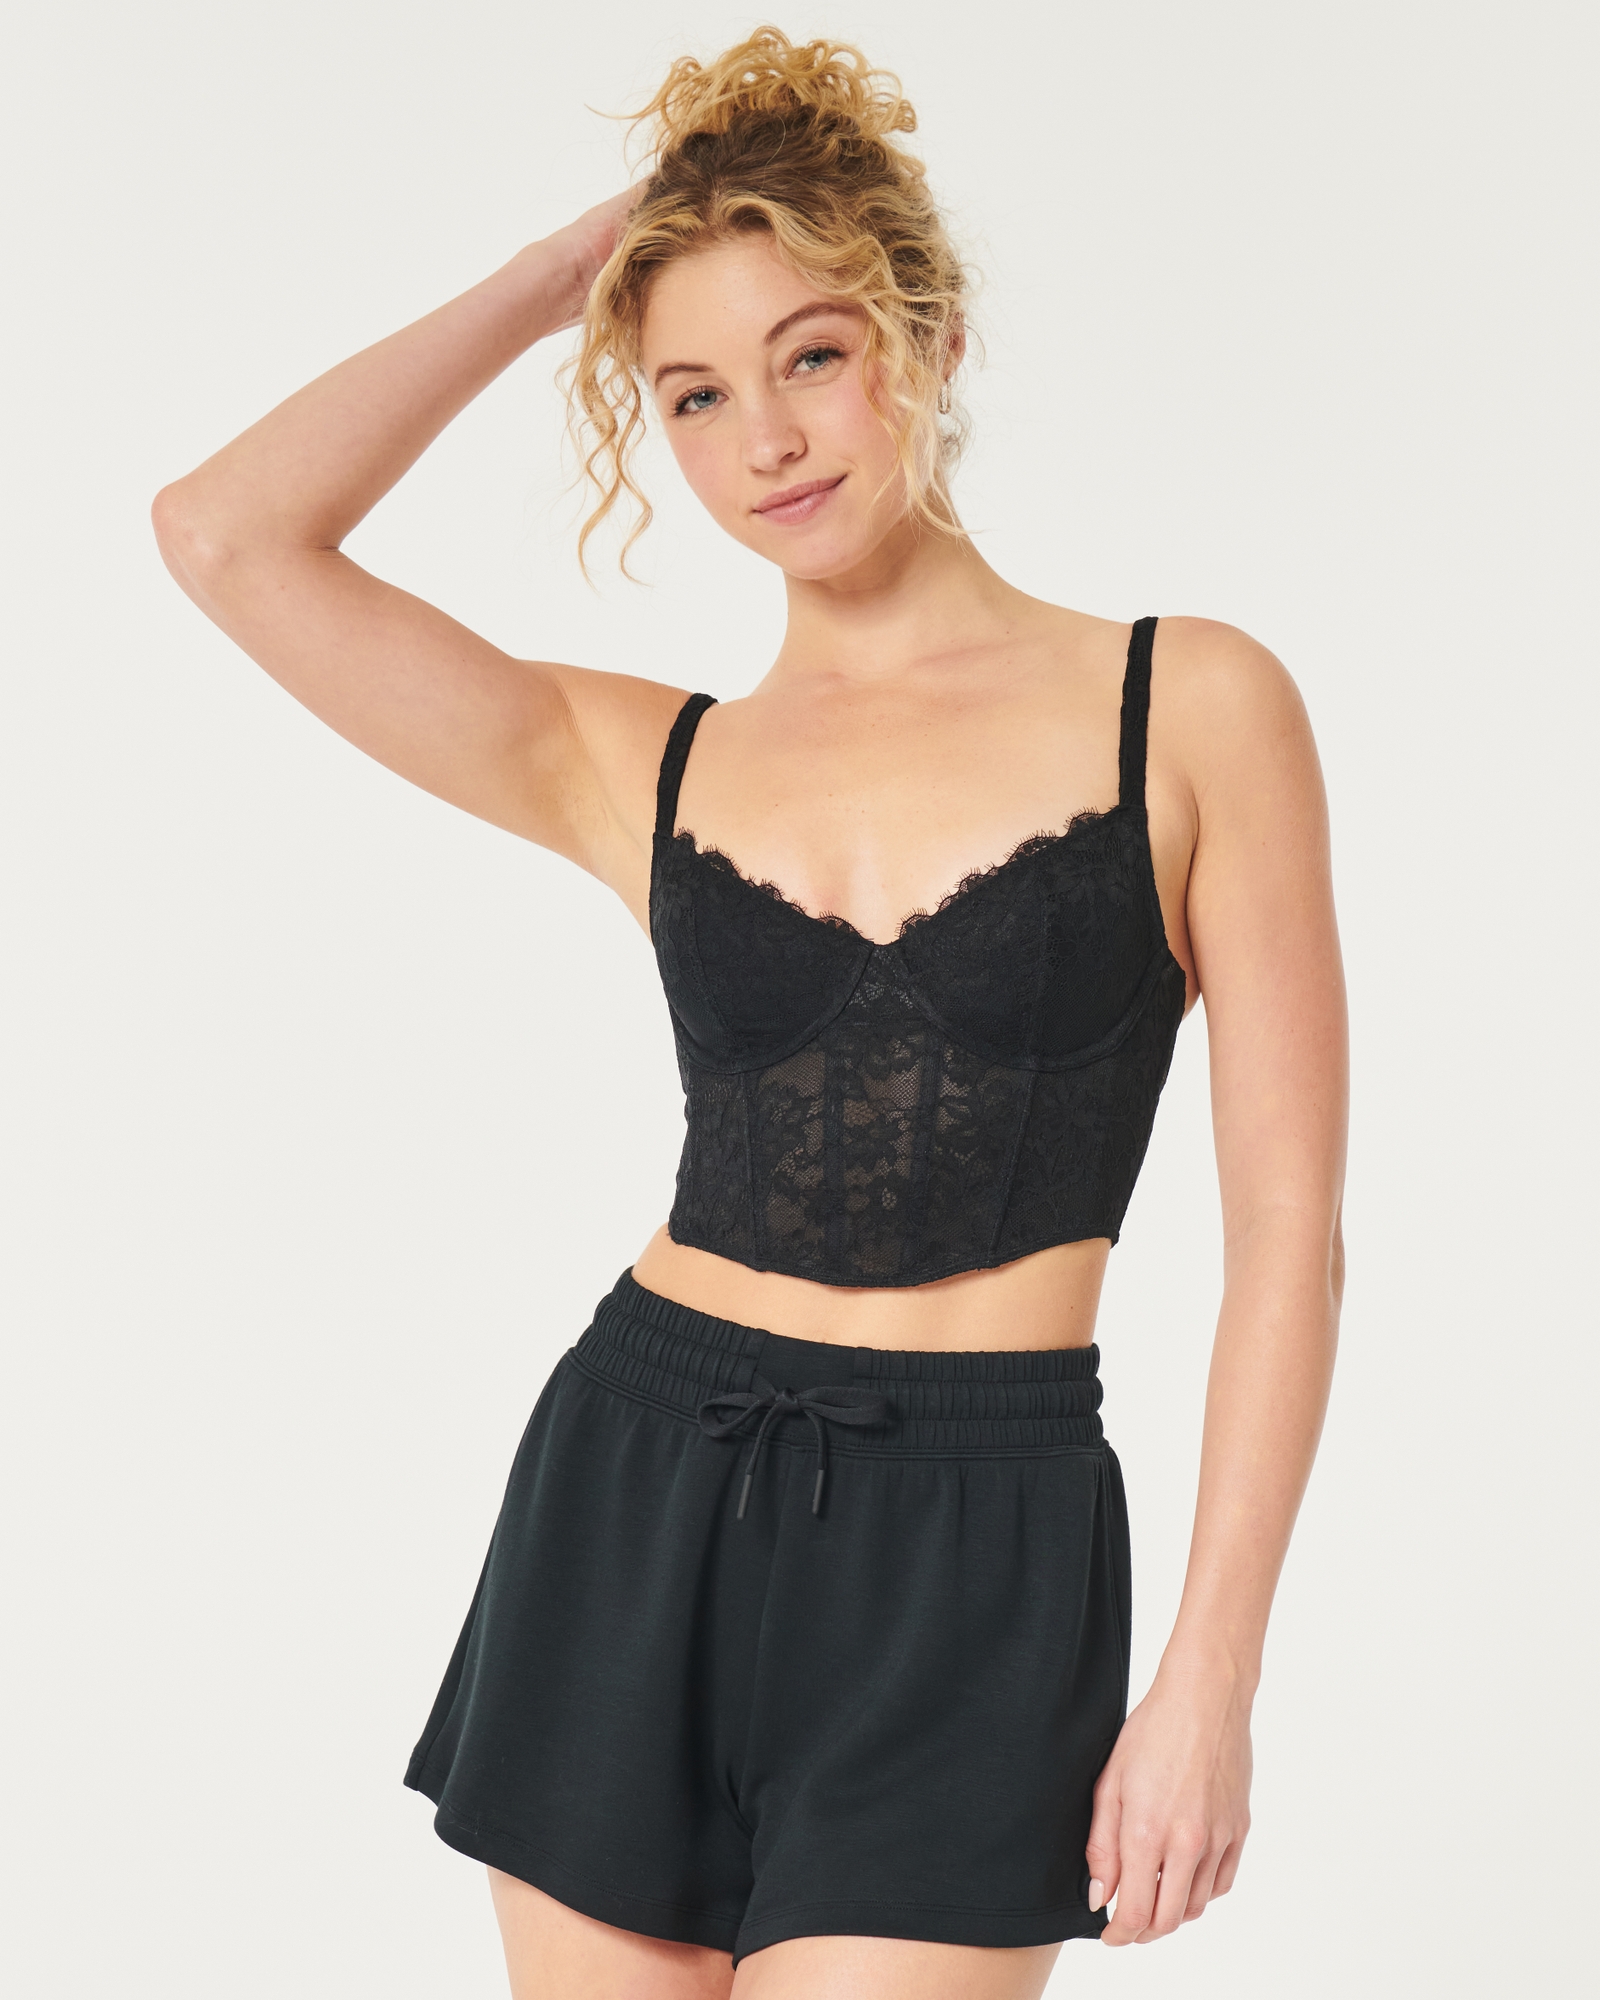 https://img.hollisterco.com/is/image/anf/KIC_510-4008-0042-900_model1.jpg?policy=product-extra-large